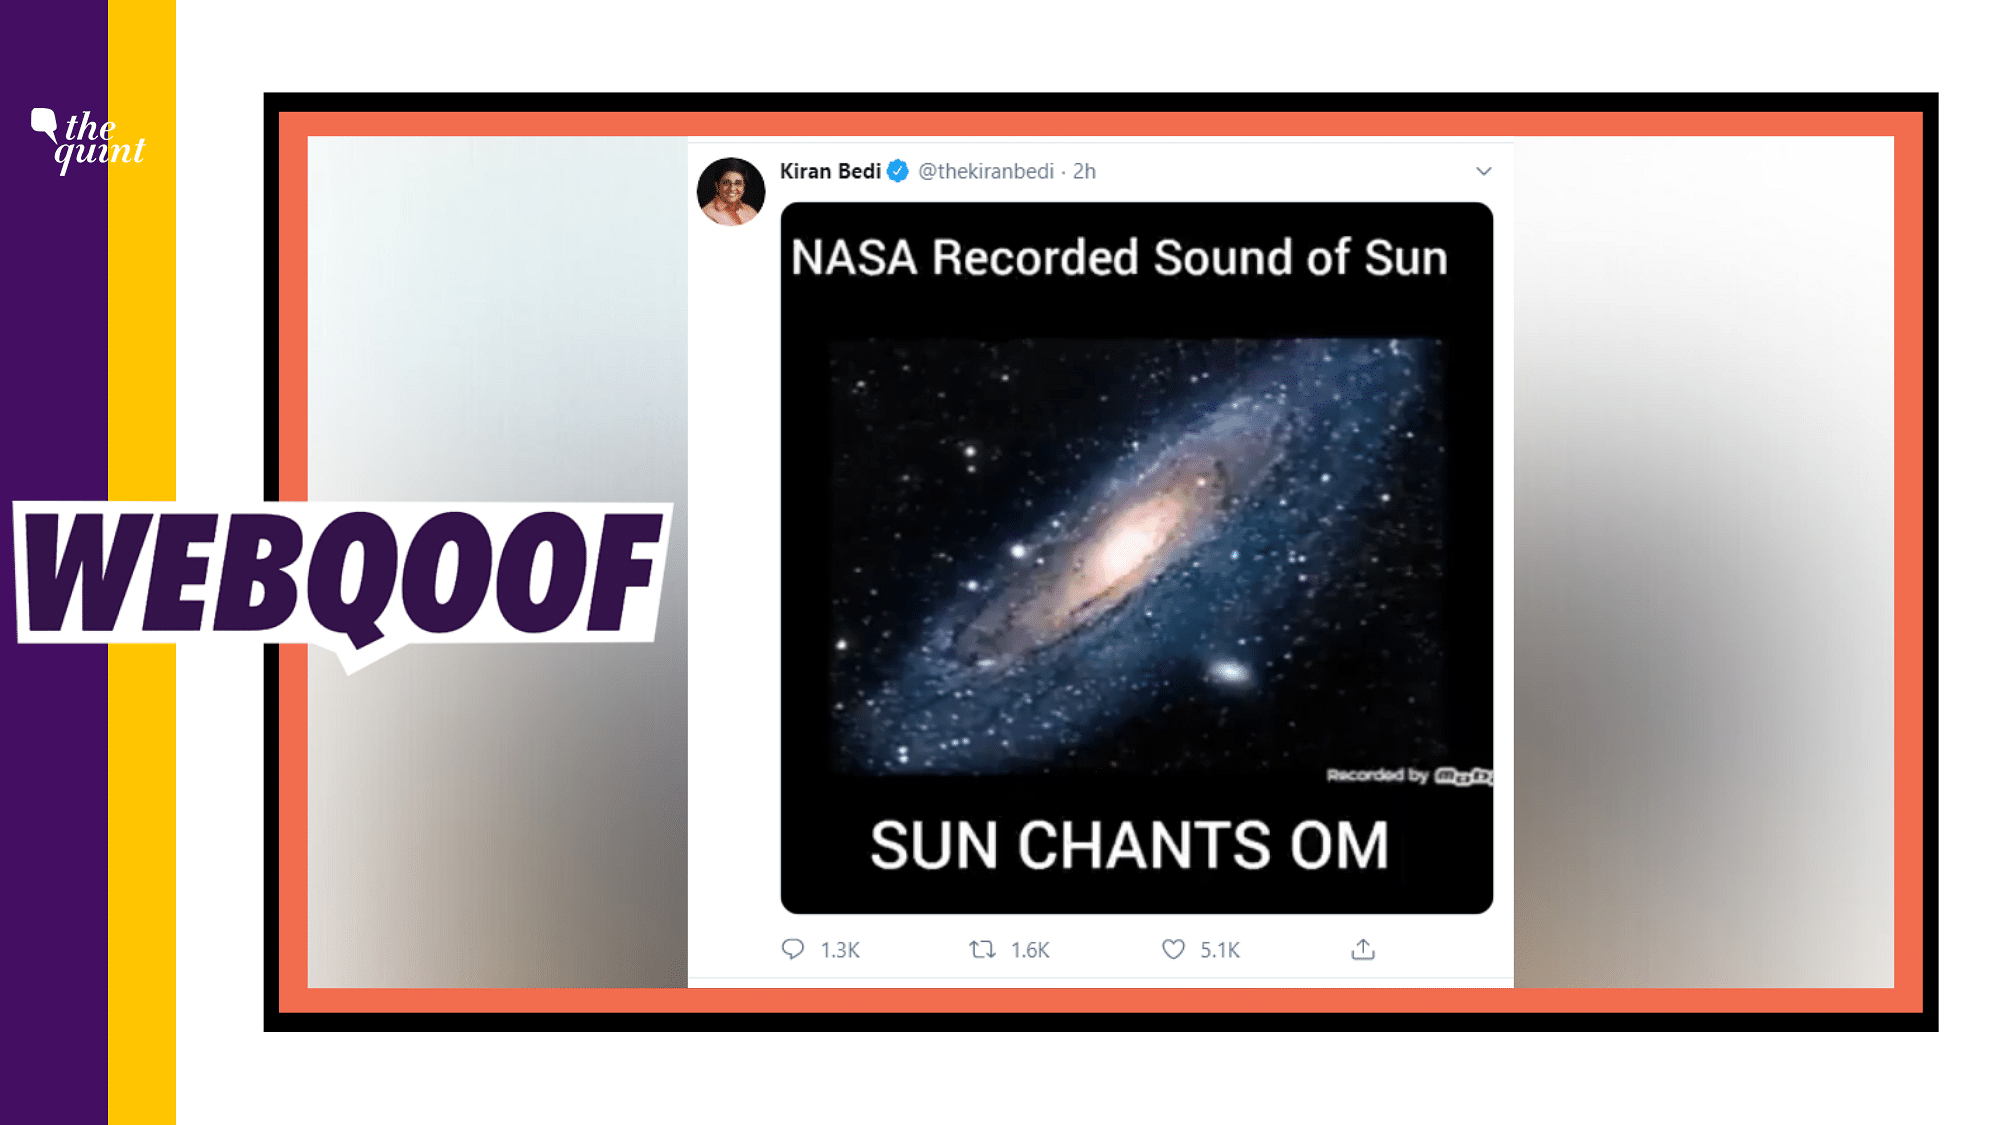 Kiran Bedi took to Twitter to share a video claiming that NASA has recorded the sound of the Sun and it was found that the Sun chants OM. 